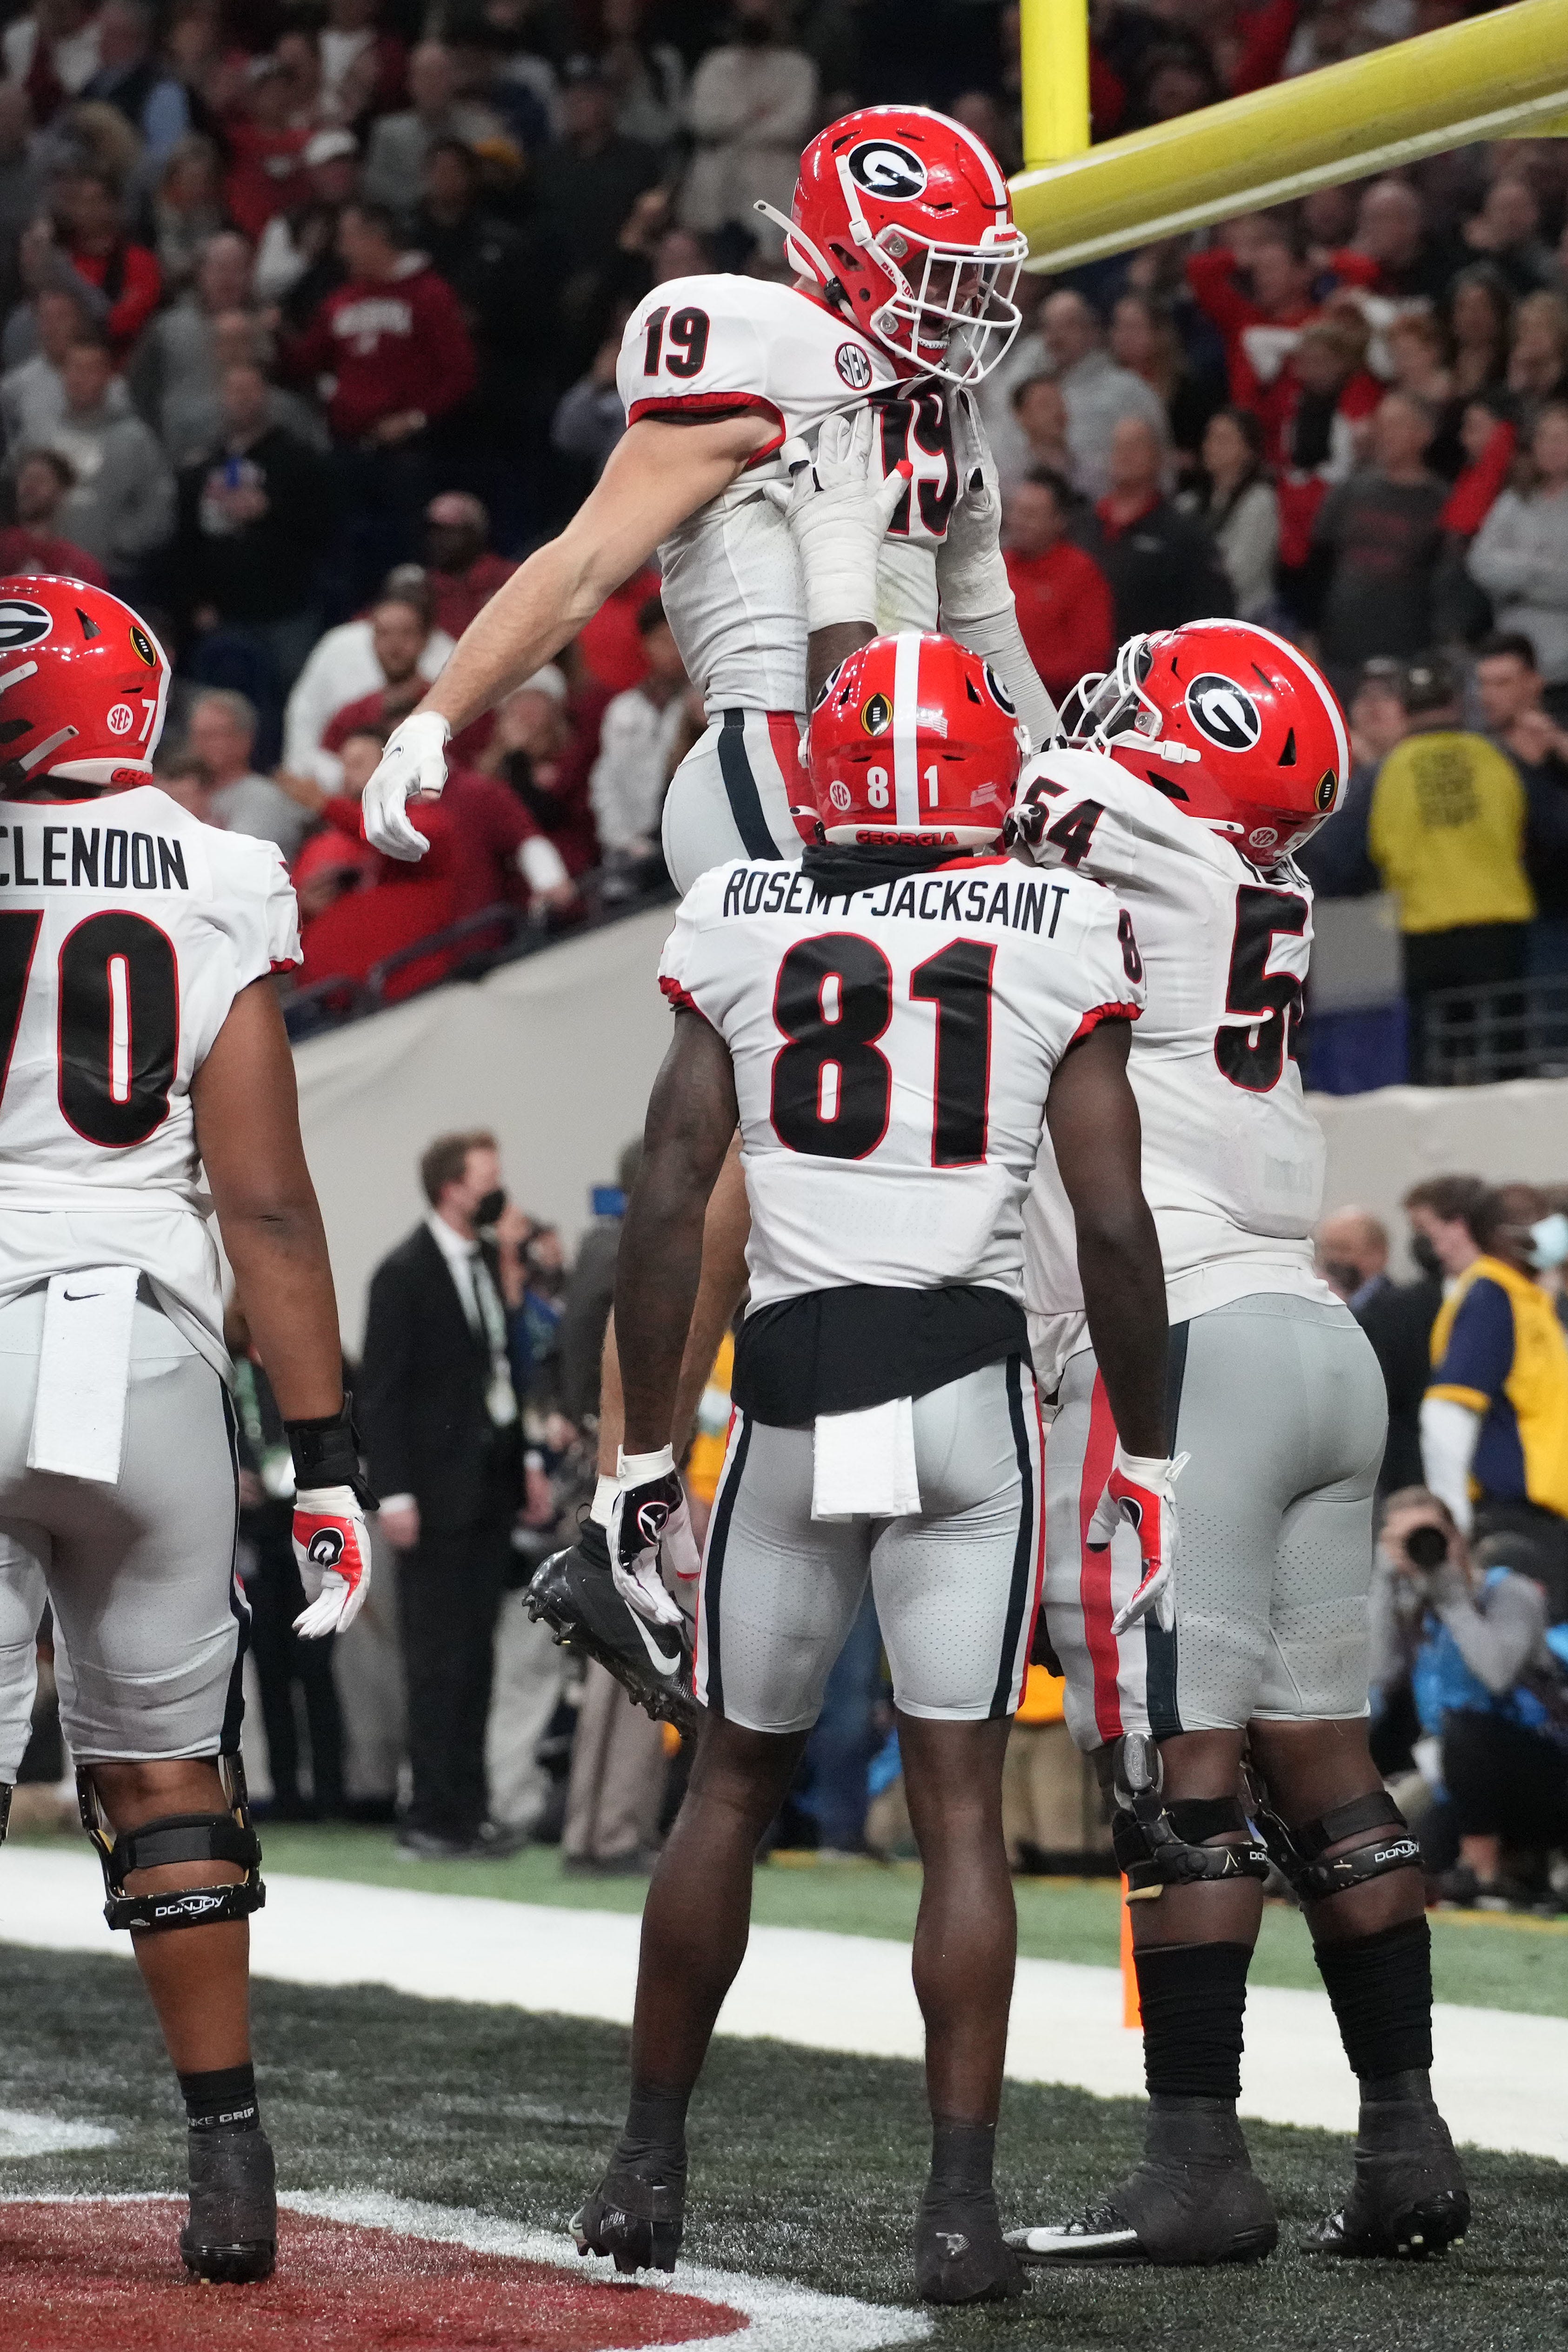 Georgia shows off Bulldog mentality in beating Alabama for first title since 1980